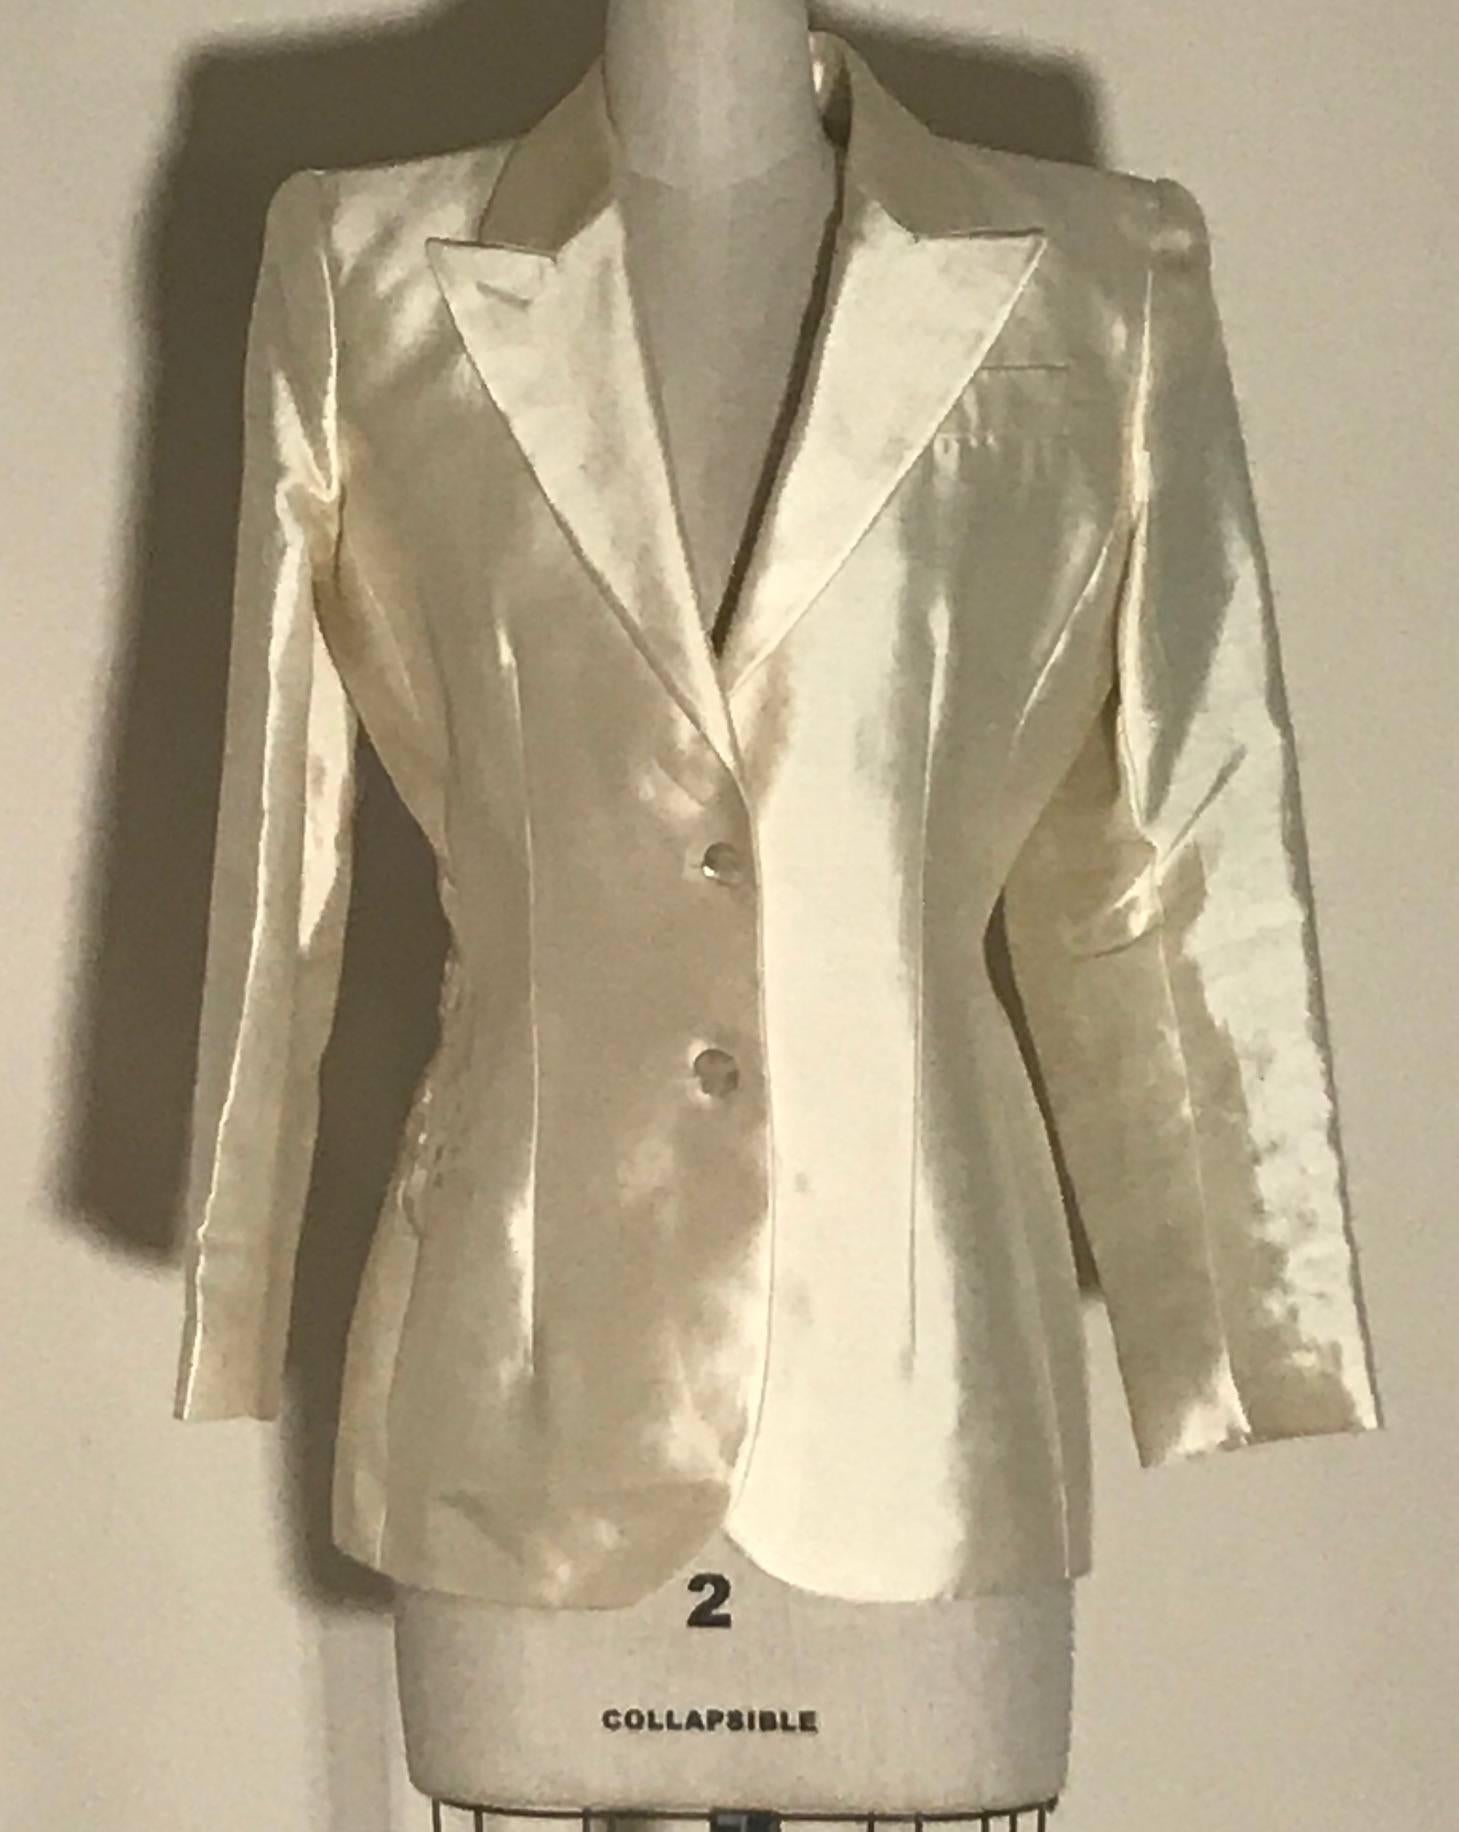 Alexander McQueen cream silk jacket with cut out leaf pattern lace detail at back from his Spring 1999 collection, "No. 13."  Leaf embroidery wraps around edge of lace to side front at one side. Light padding at shoulders for shape. Two